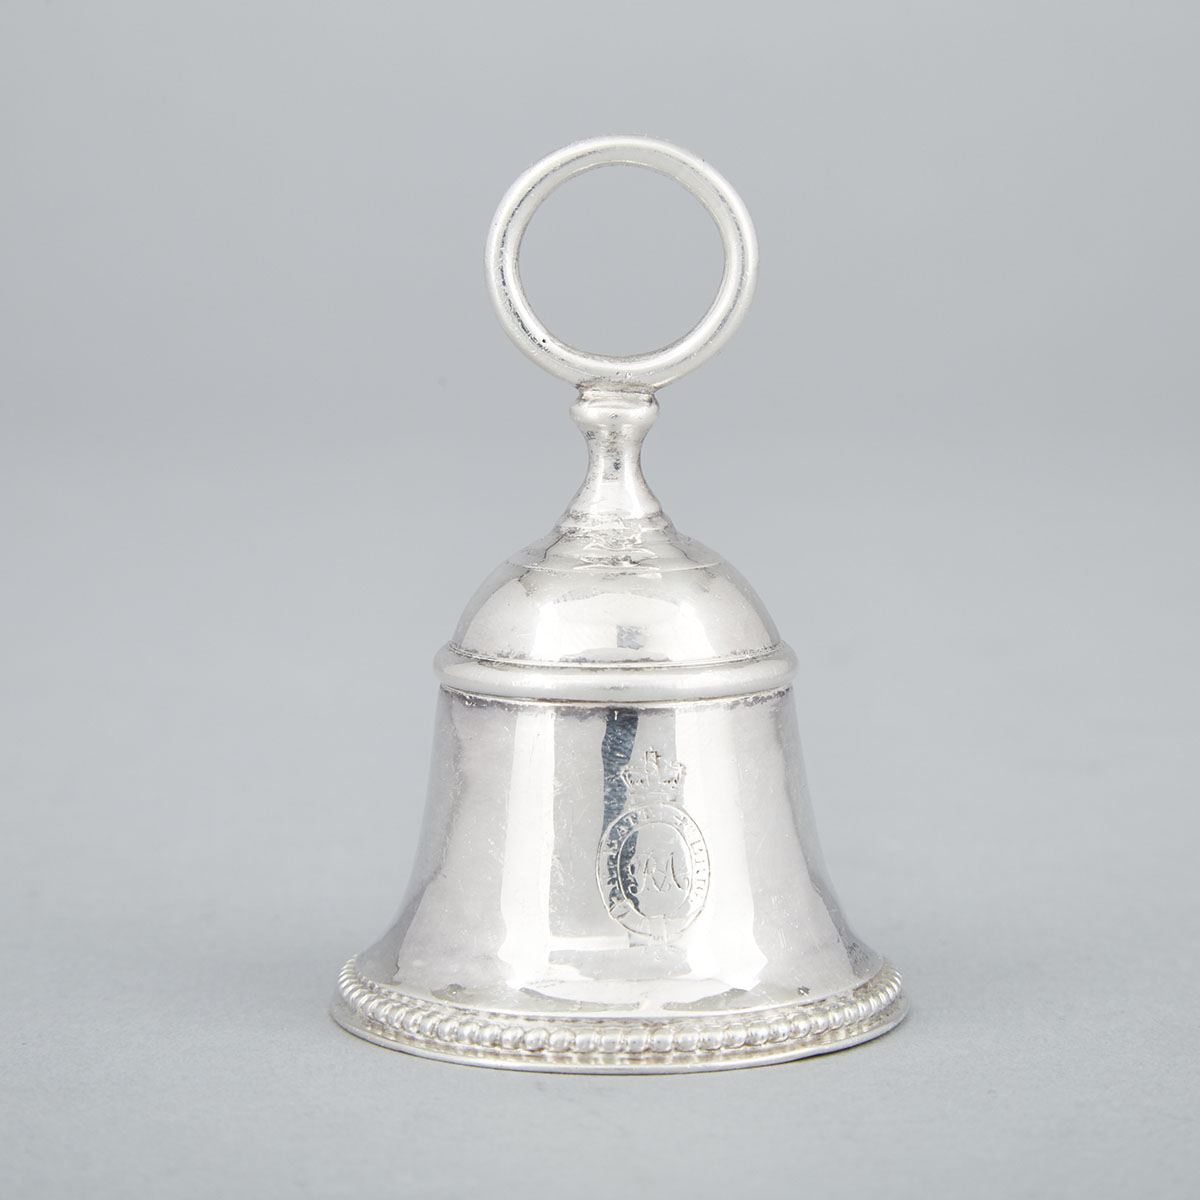 Canadian Silver Officers’ Mess Table Bell, Savage & Lyman, Montreal, Que., c.1851-67